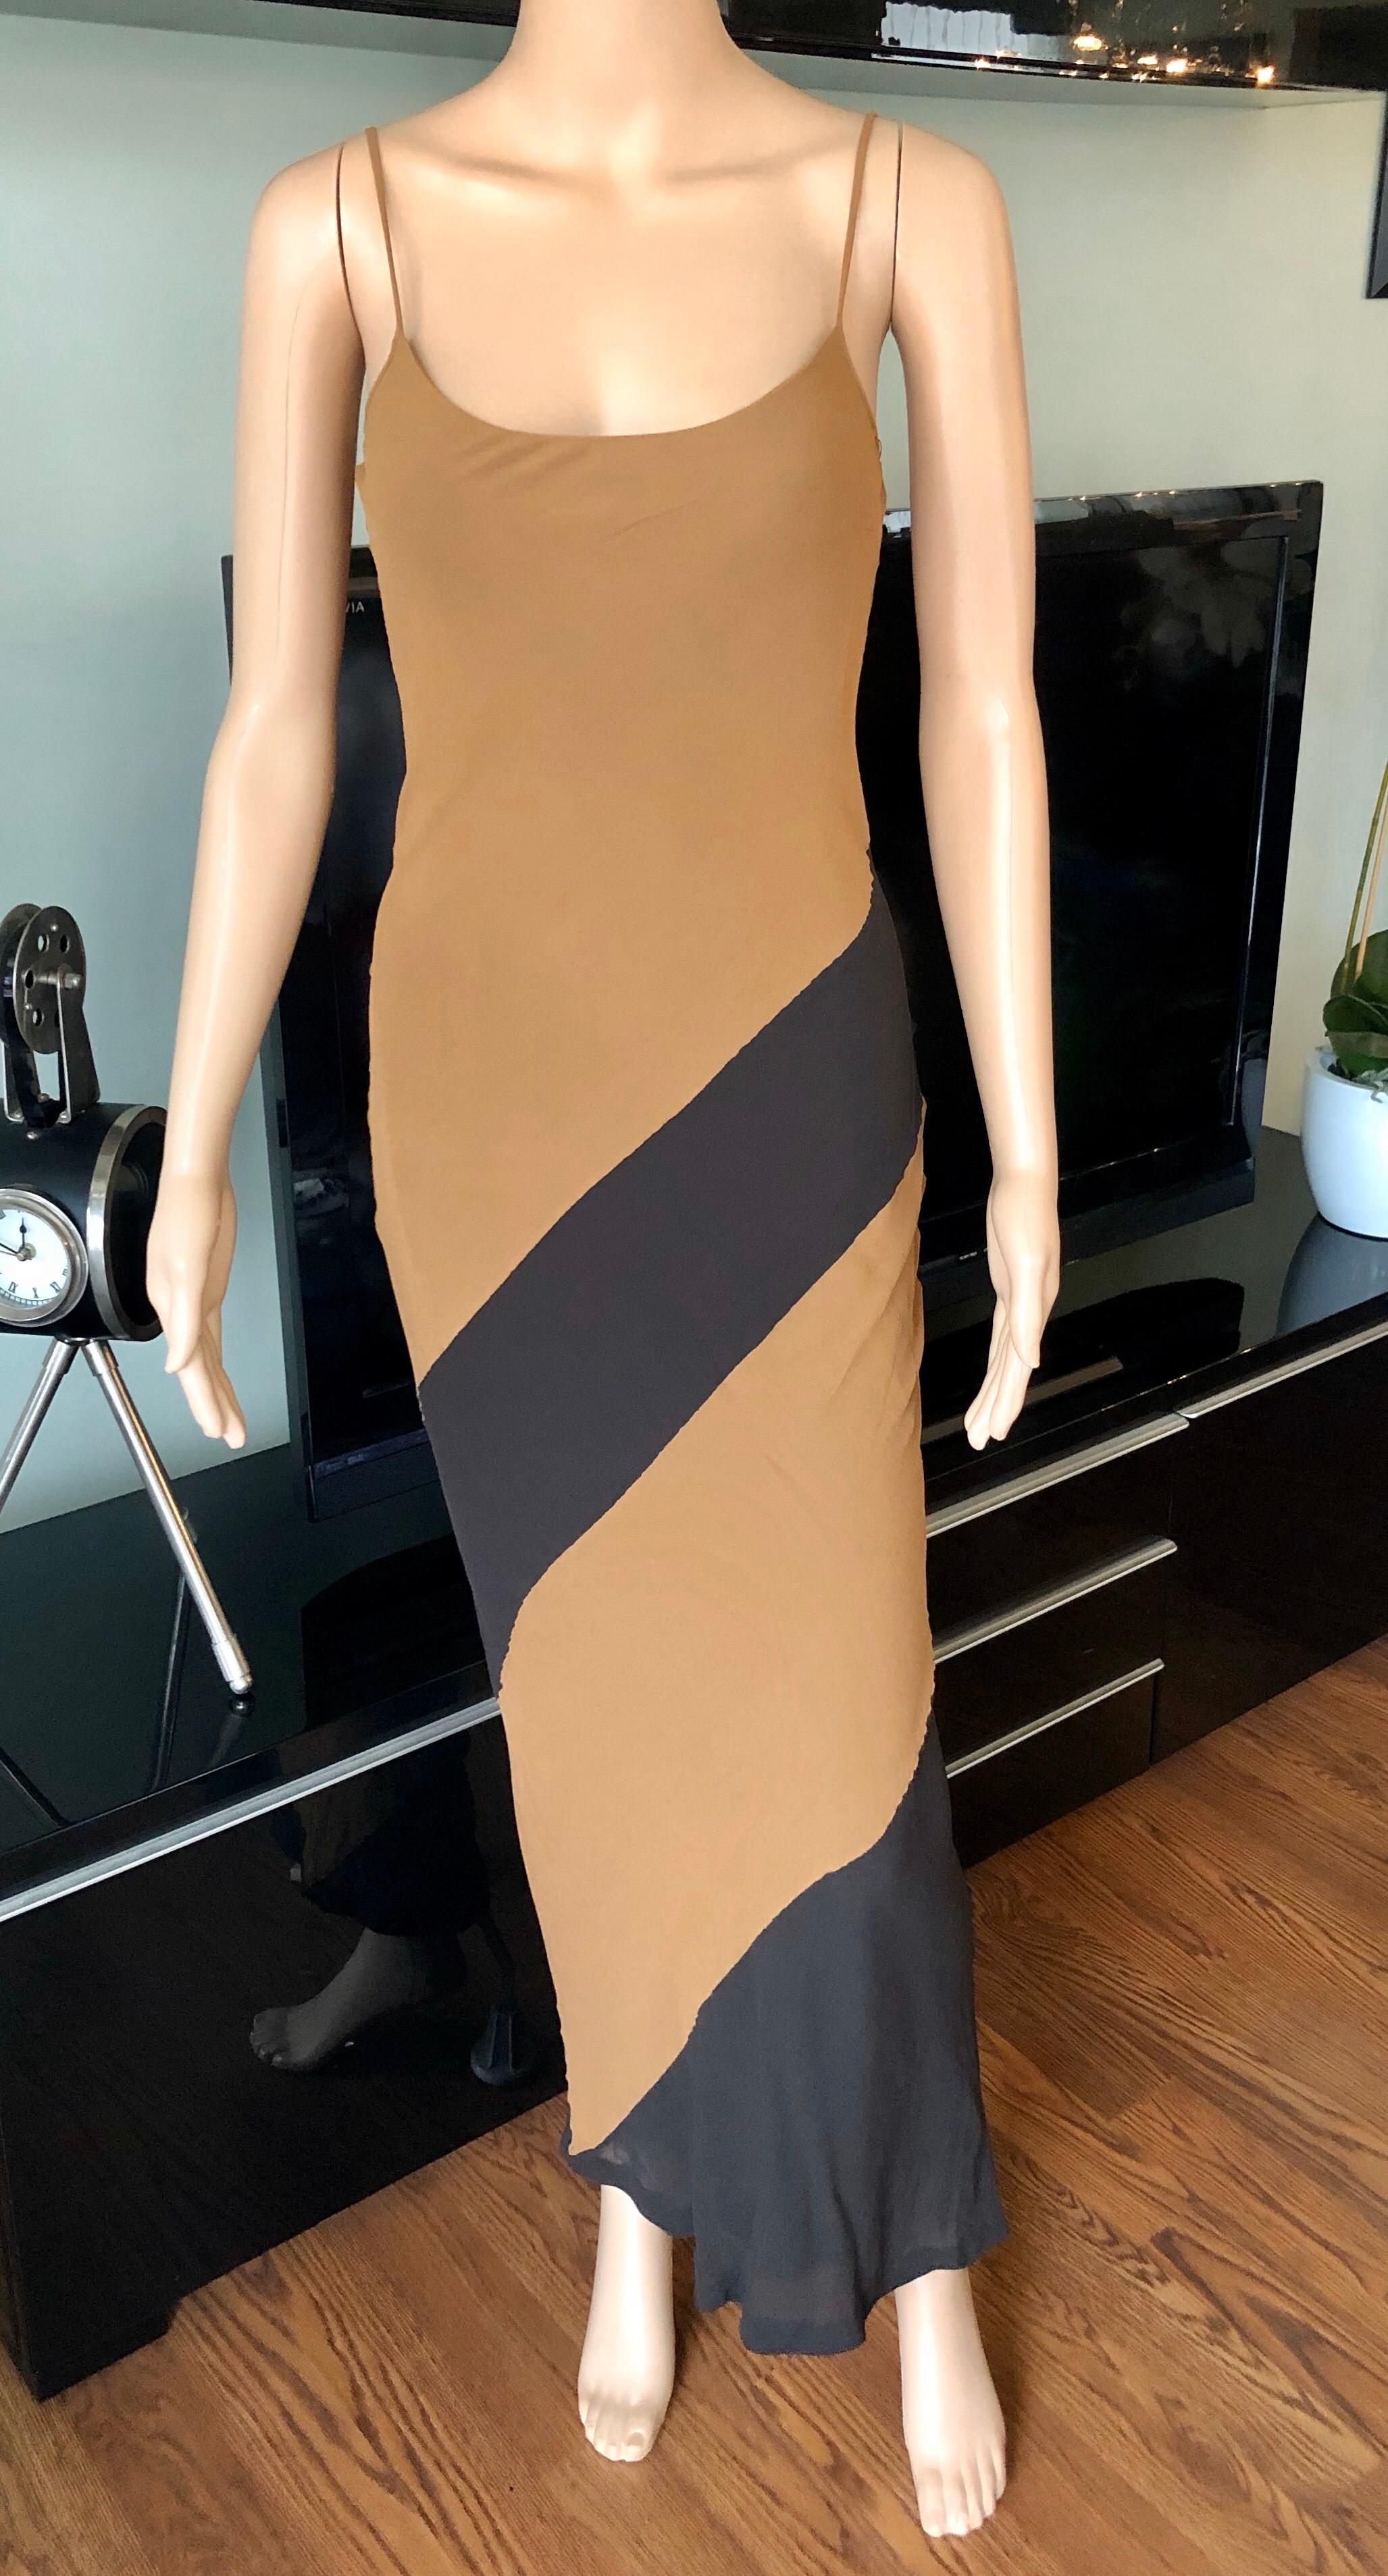 Tom Ford for Gucci F/W 1997 Vintage Striped Brown & Caramel Slip Maxi Evening Dress Gown IT 40

Tom Ford for Gucci slip maxi dress featuring stripes throughout and tonal stitching at seams.
